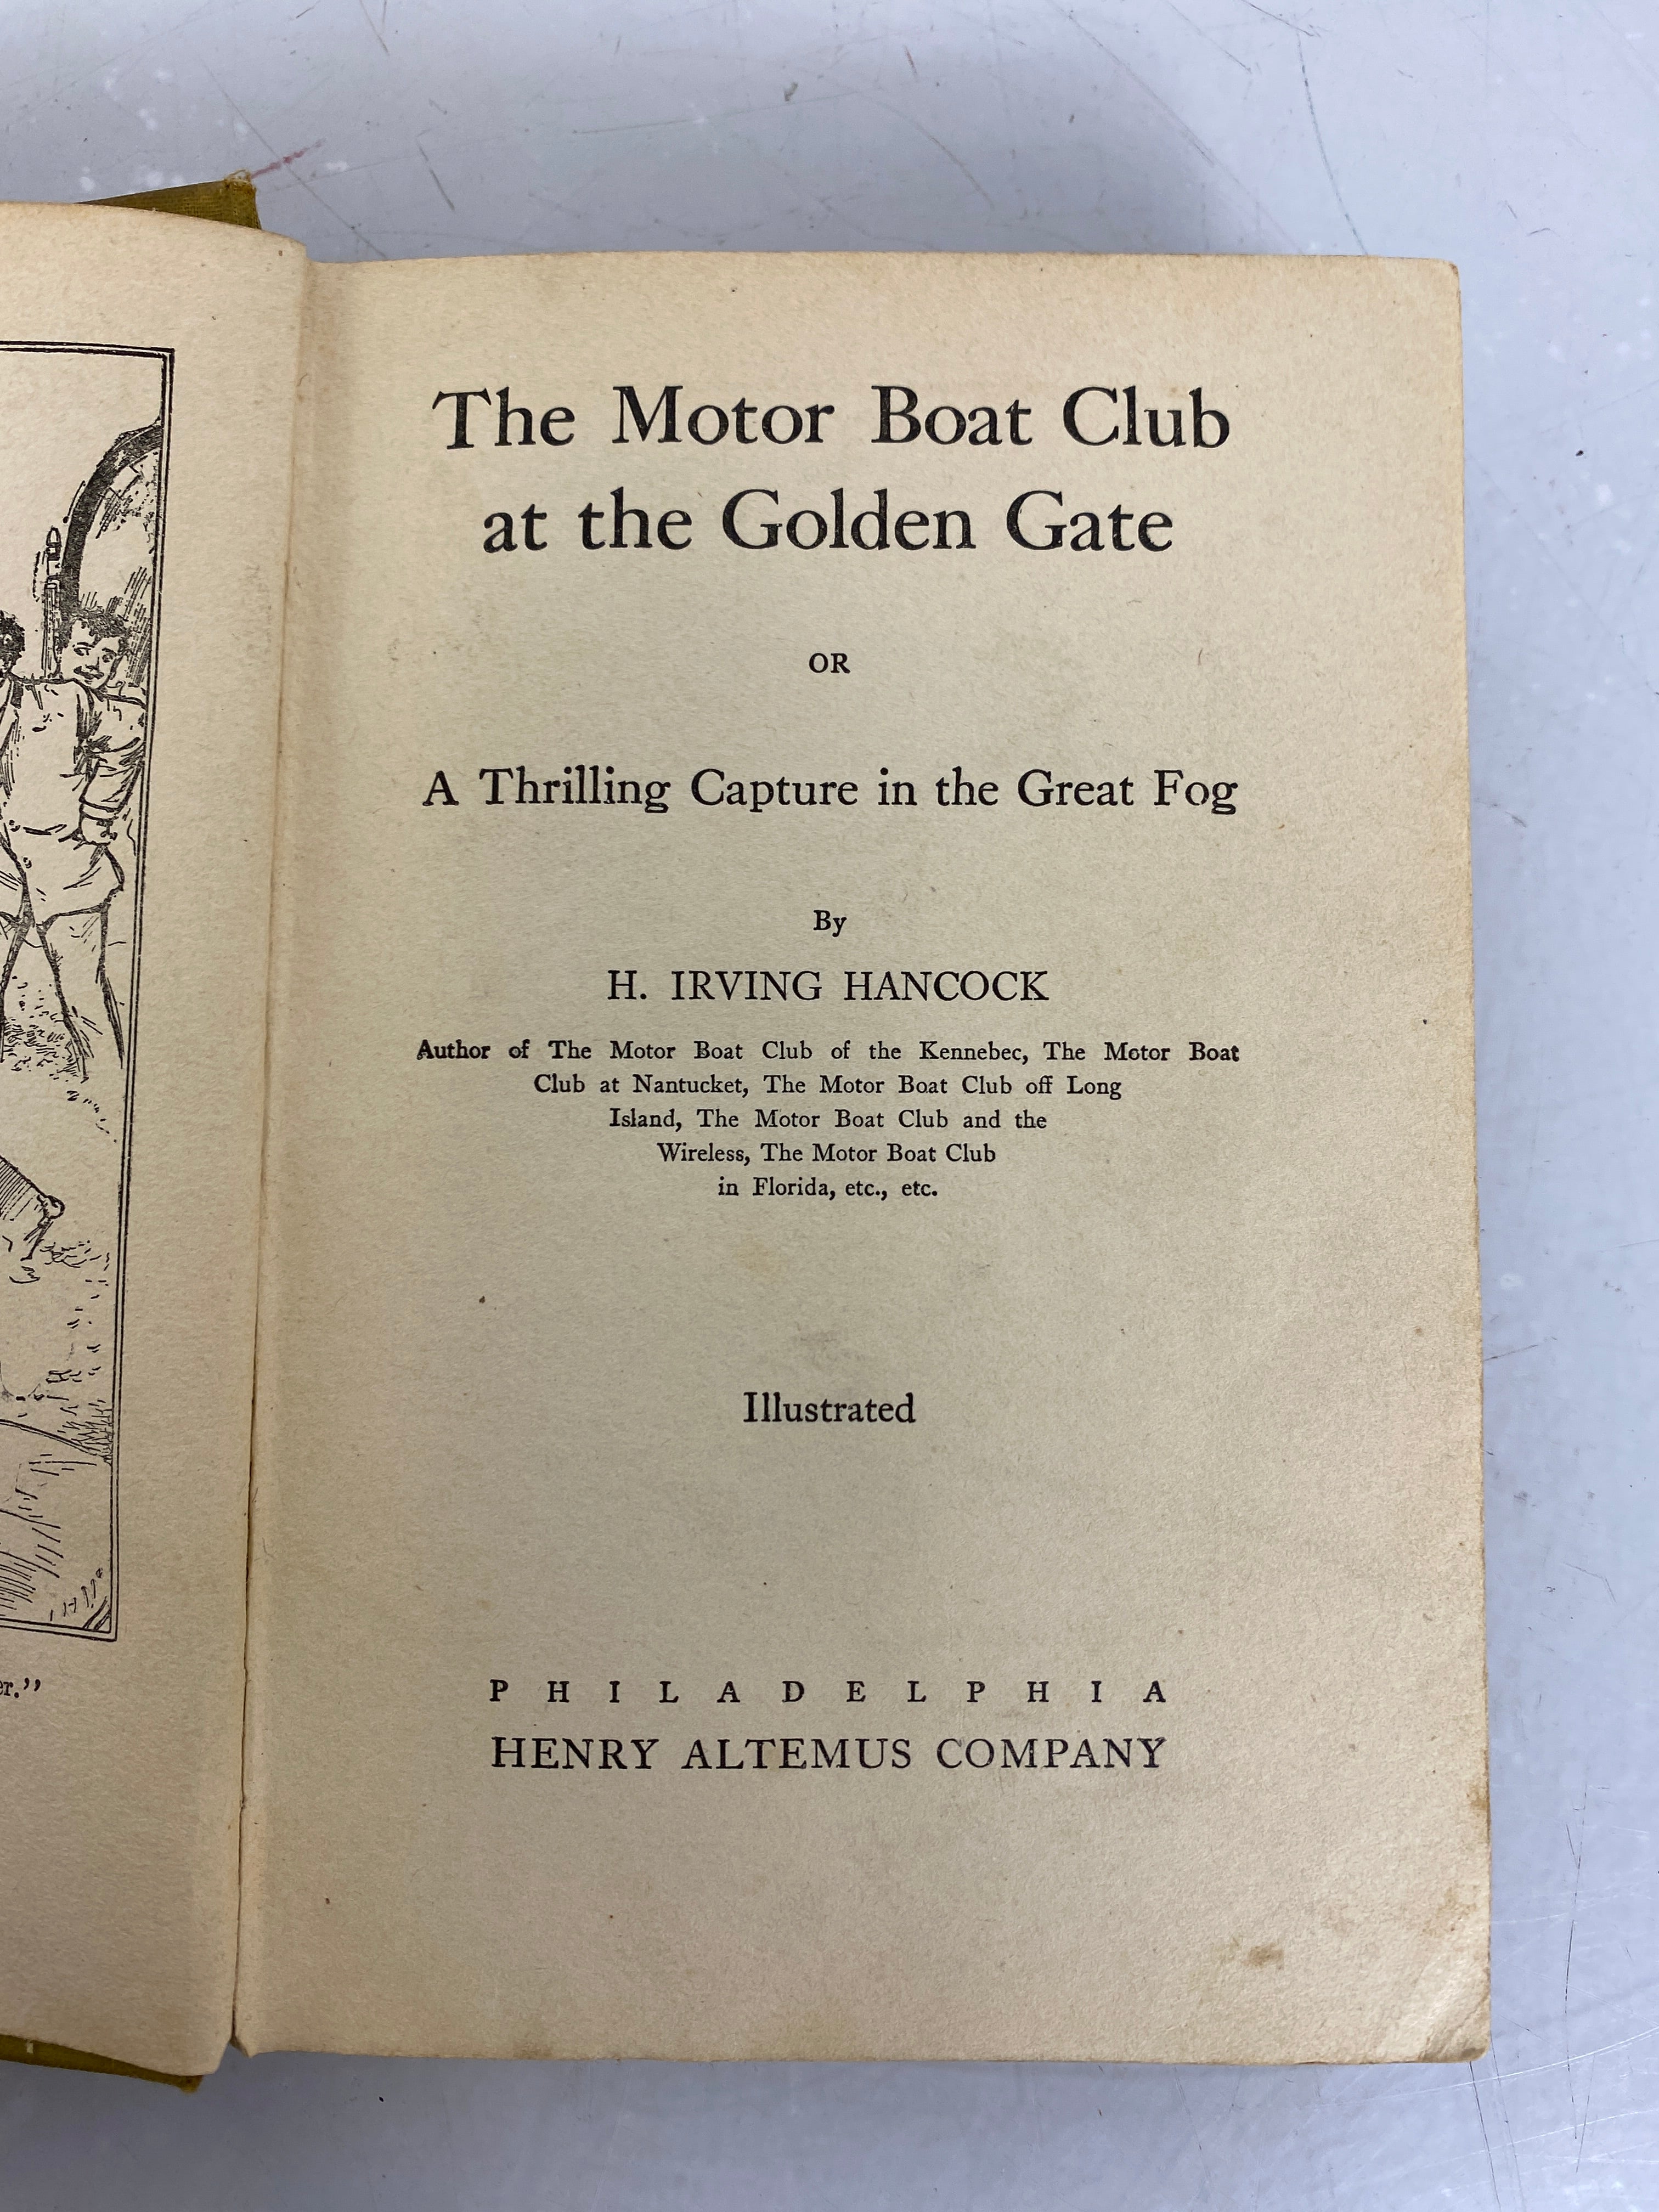 The Motor-Boat Club at the Golden Gate by H. Irving Hancock 1909 HC